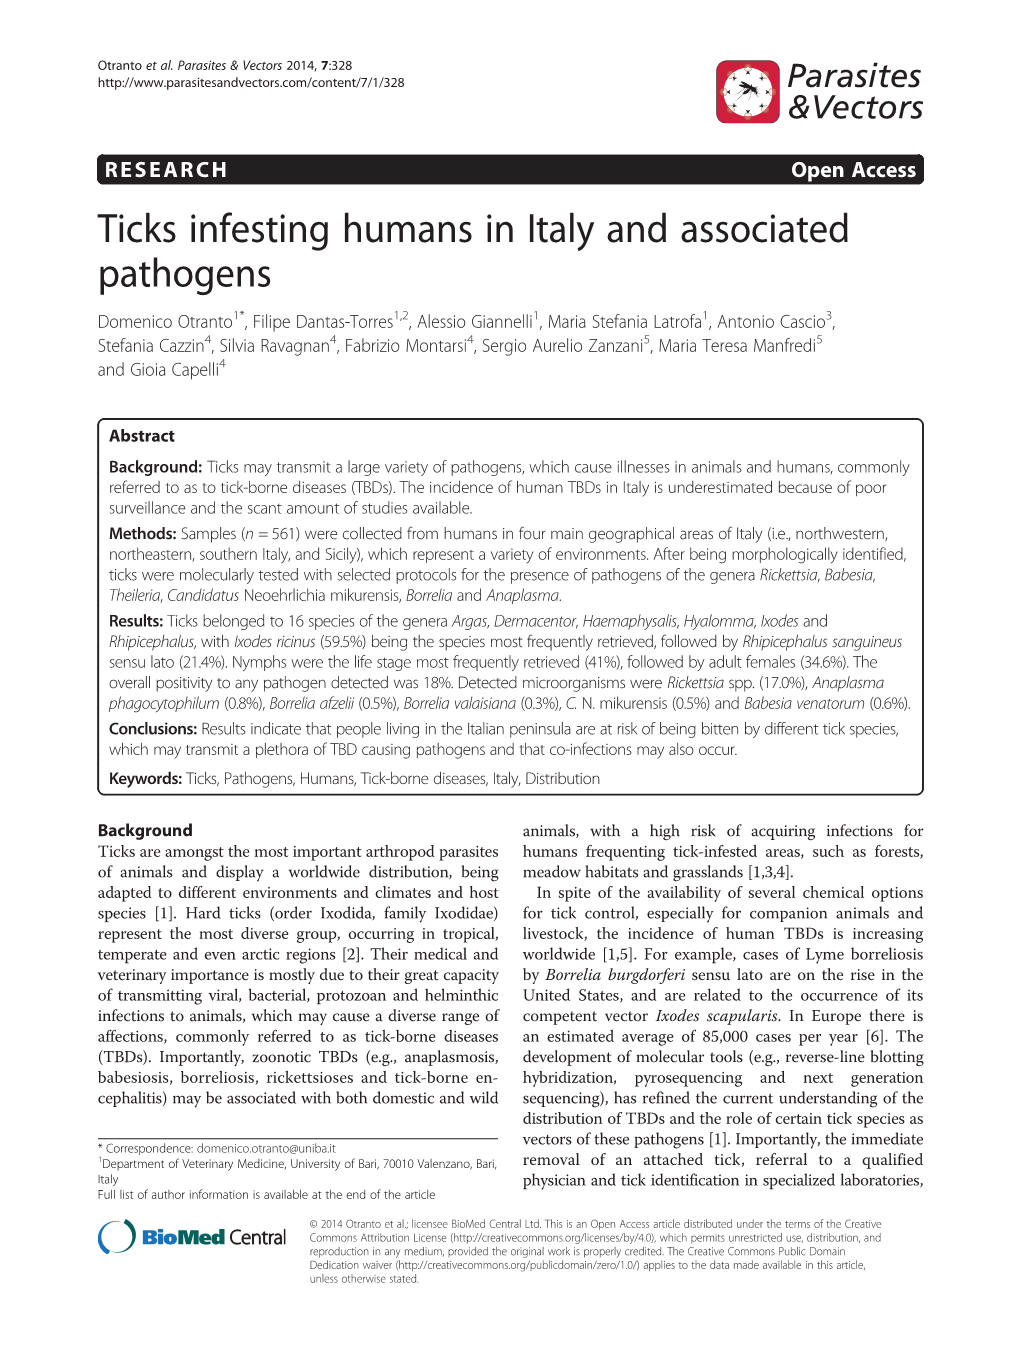 Ticks Infesting Humans in Italy and Associated Pathogens